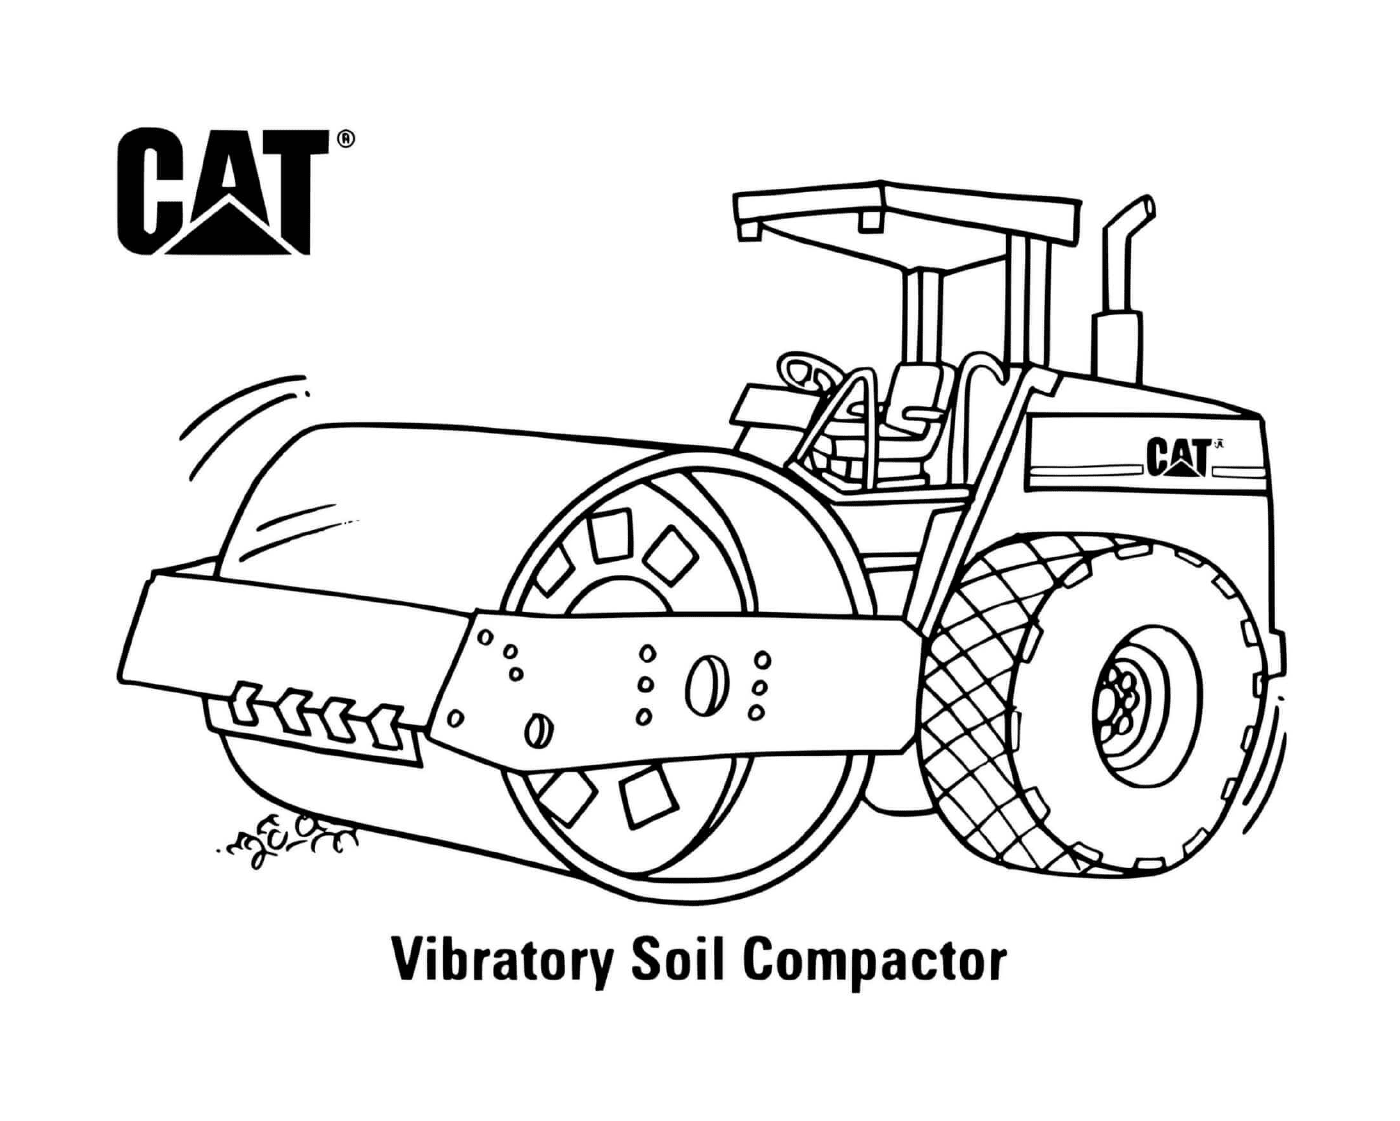  CAT vibrating ground compactor used on a construction site 